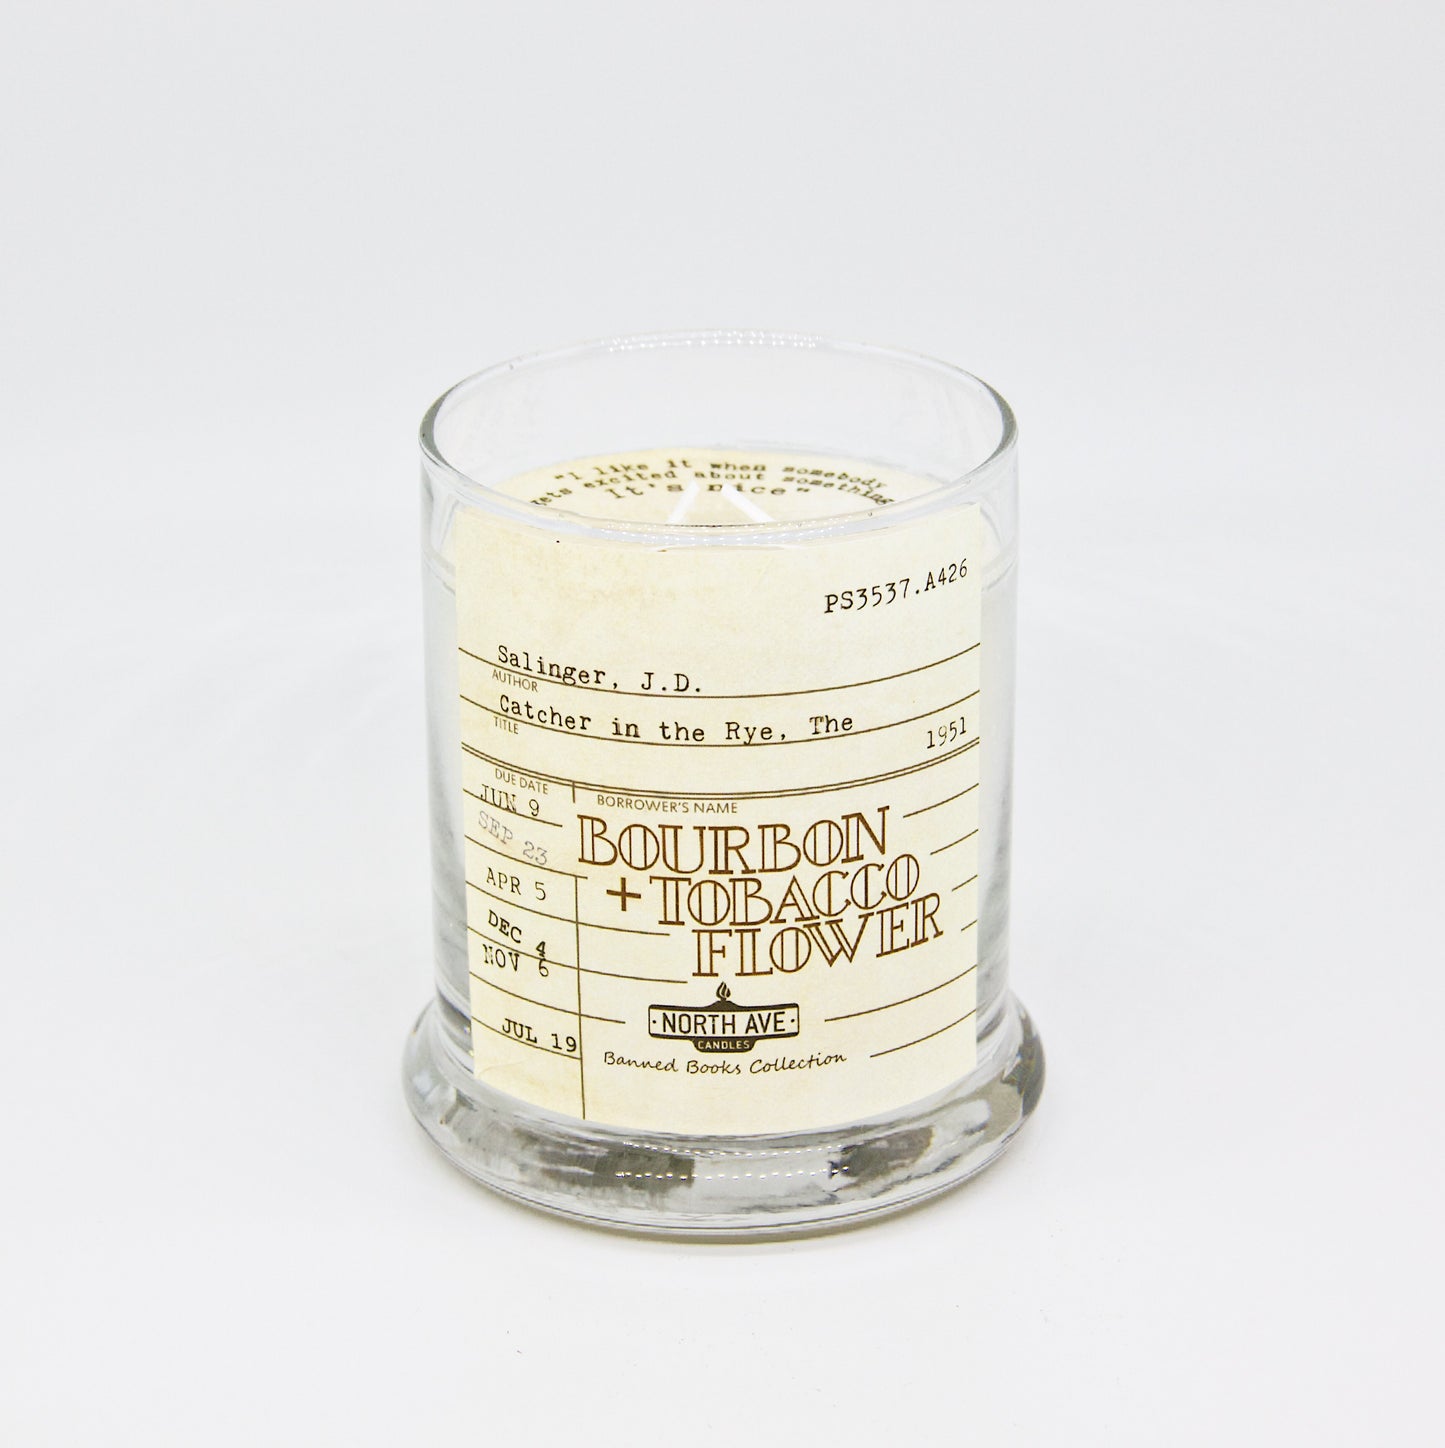 Bourbon + Tobacco Flower: Catcher in the Rye Candle